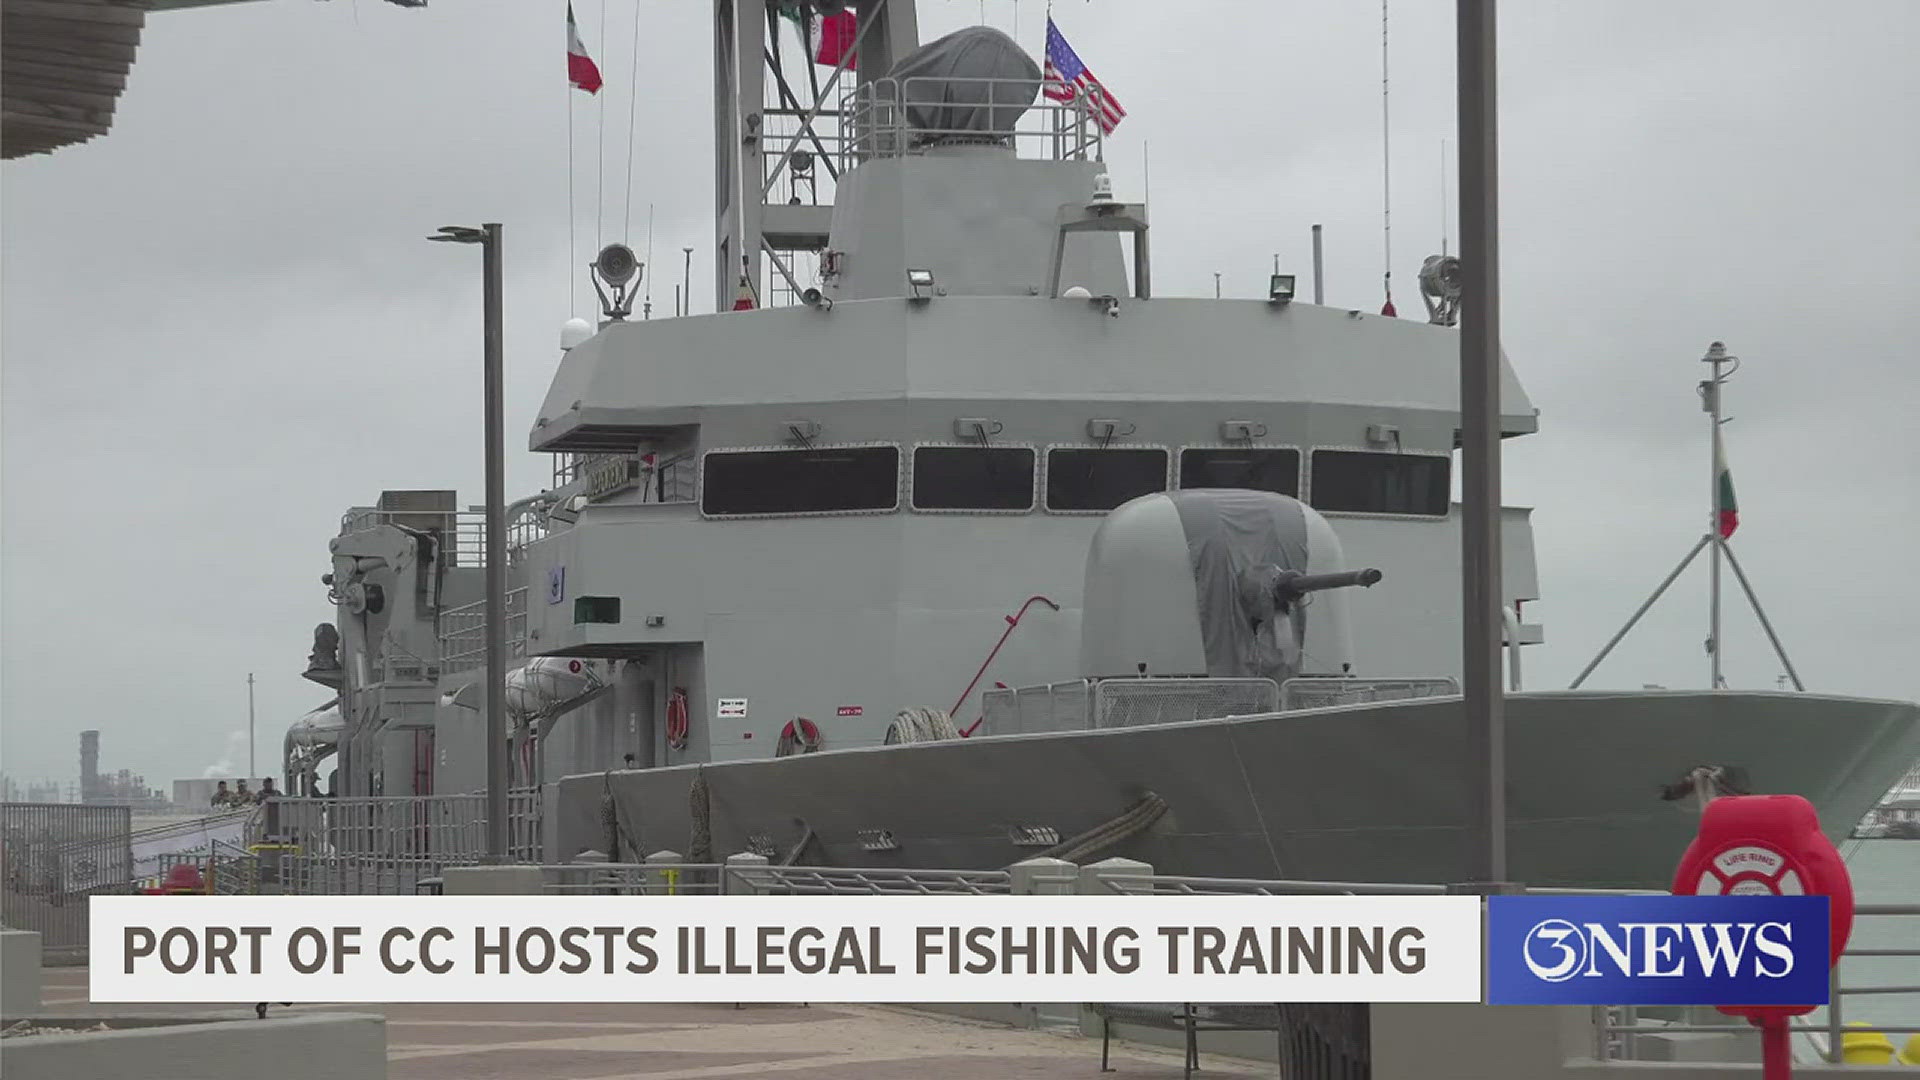 The Mexican Navy and Port of Corpus Christi will train for three days with exercises regarding illegal unregulated, unreported fishing.